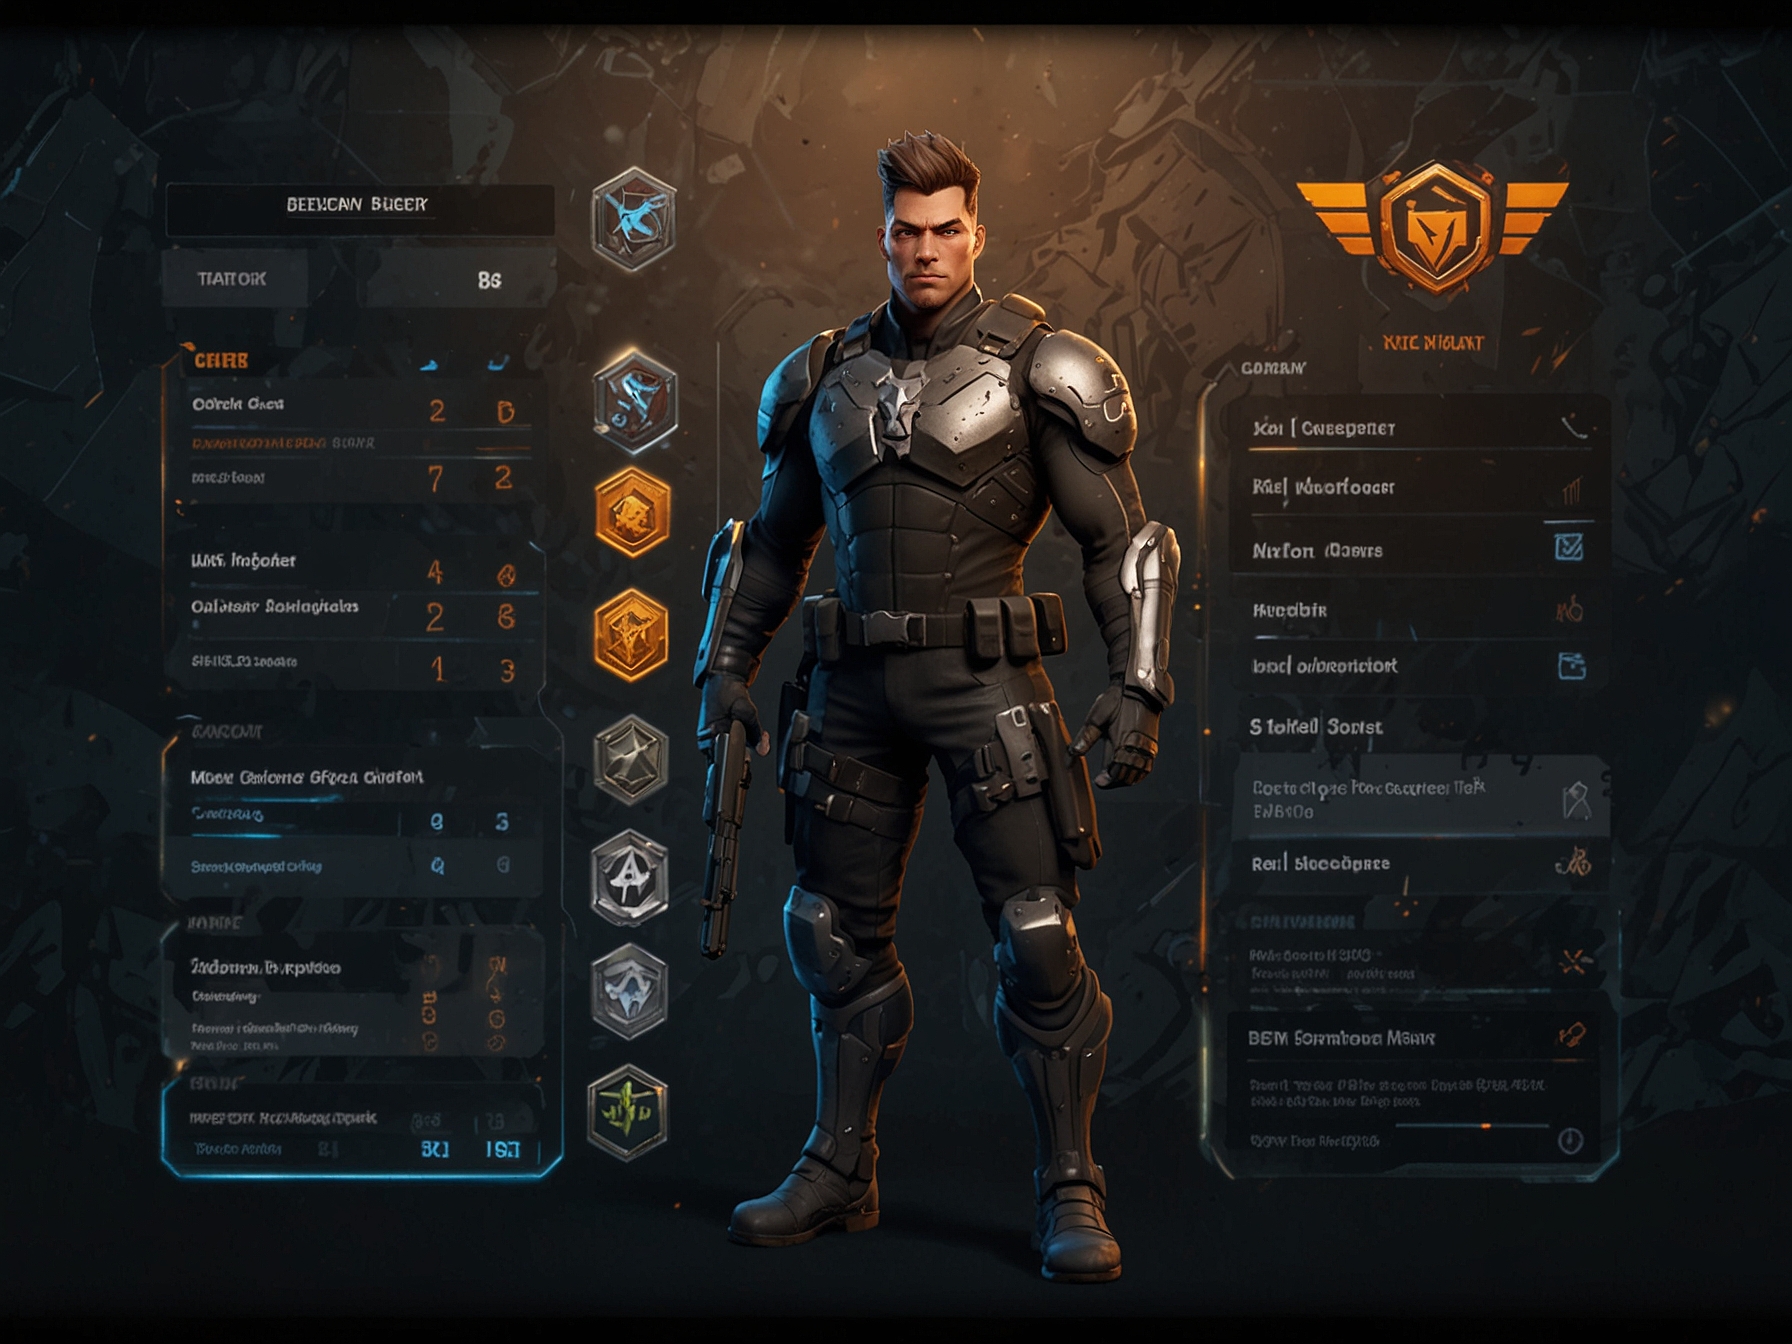 A screenshot of XDefiant's Ranked mode interface showing player ranks, skill levels, and customized character skins, highlighting the competitive environment and exclusive rewards.